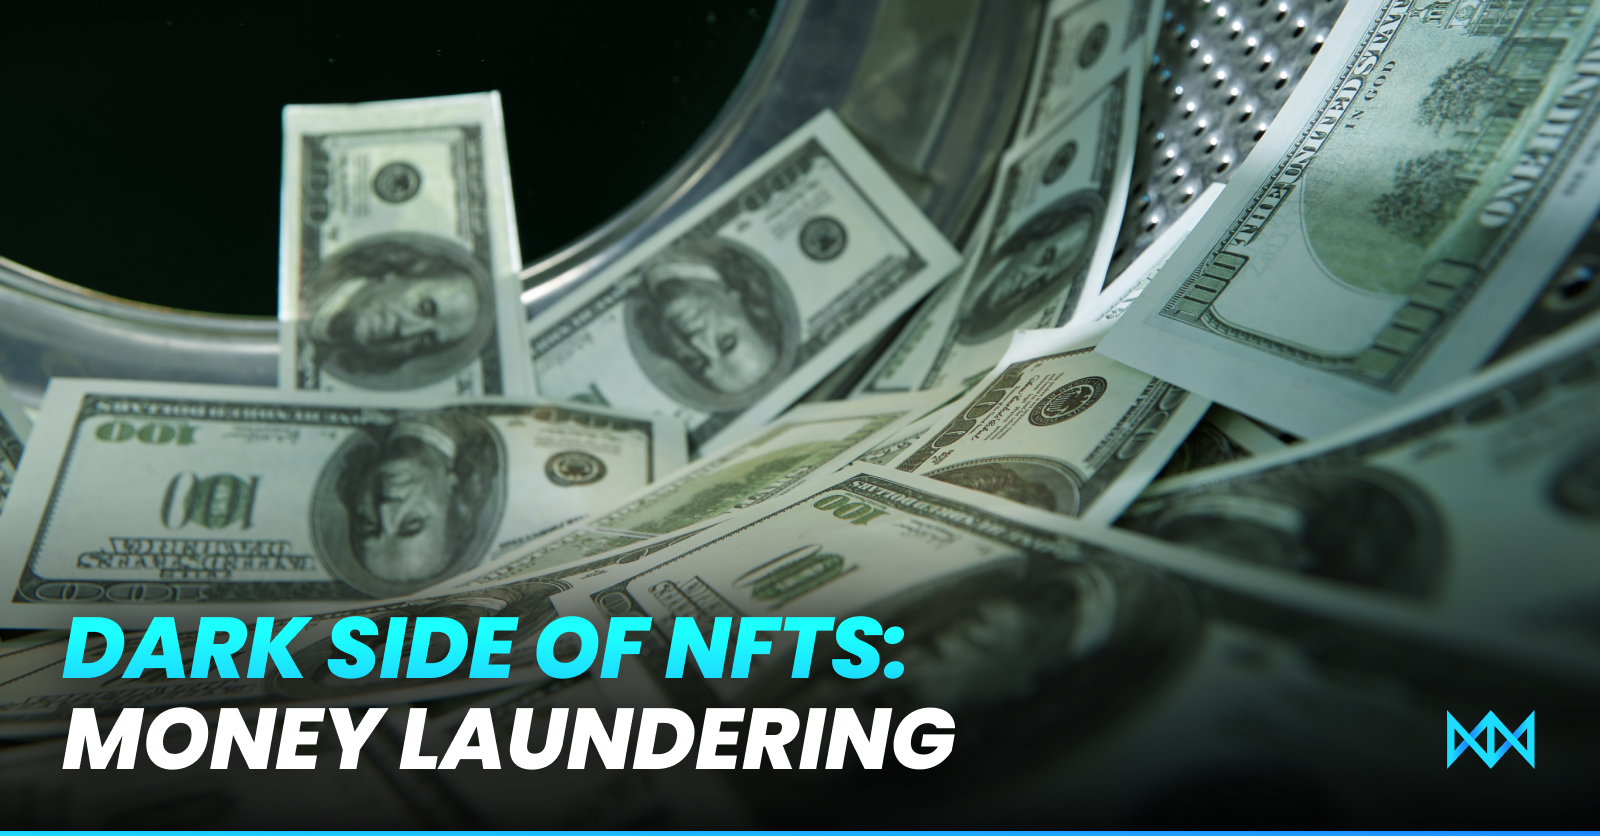 NFTs Are Being Abused for Money Laundering